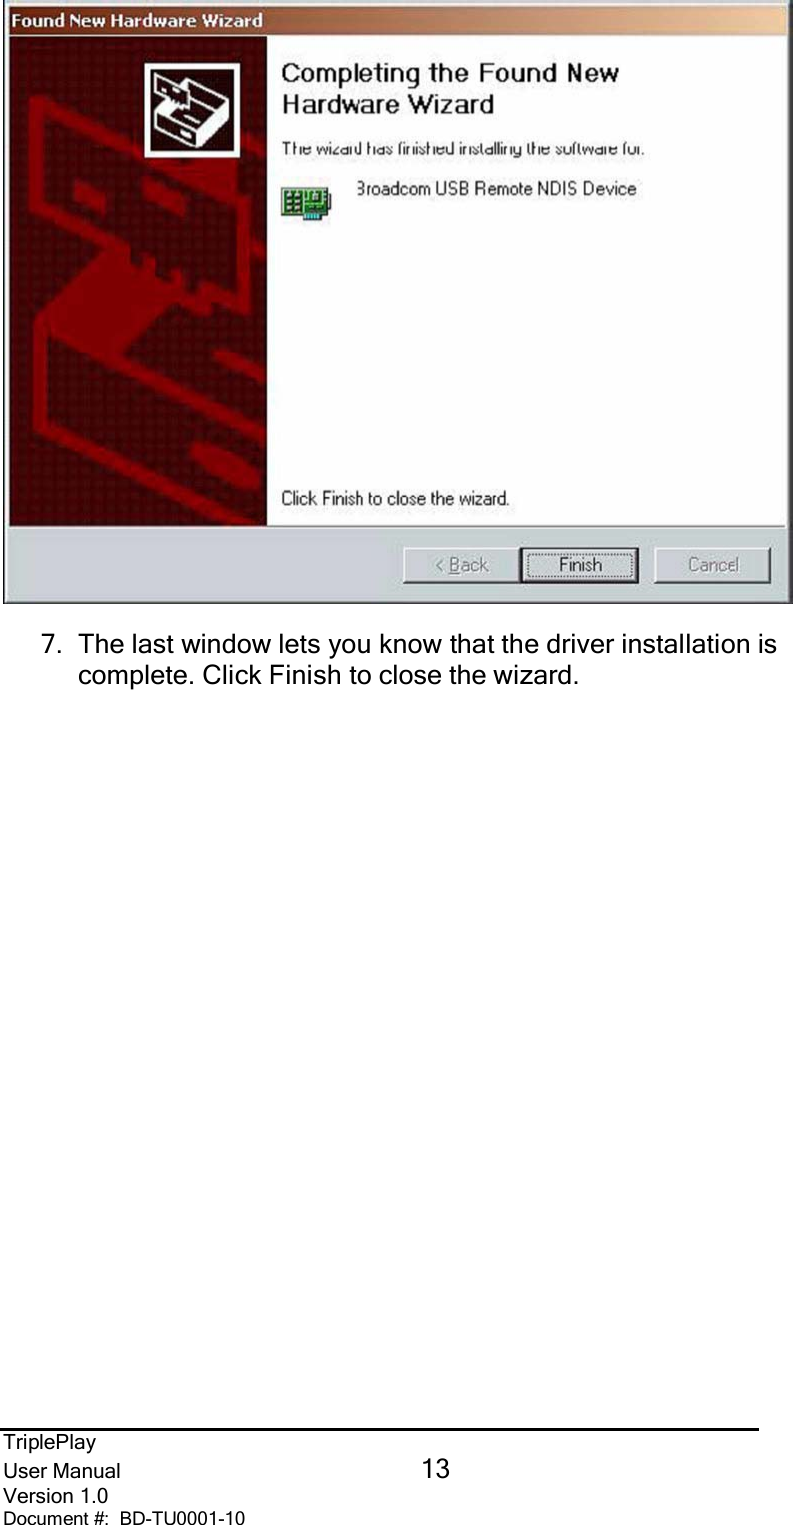 TriplePlayUser Manual 13Version 1.0Document #:  BD-TU0001-107.  The last window lets you know that the driver installation iscomplete. Click Finish to close the wizard.